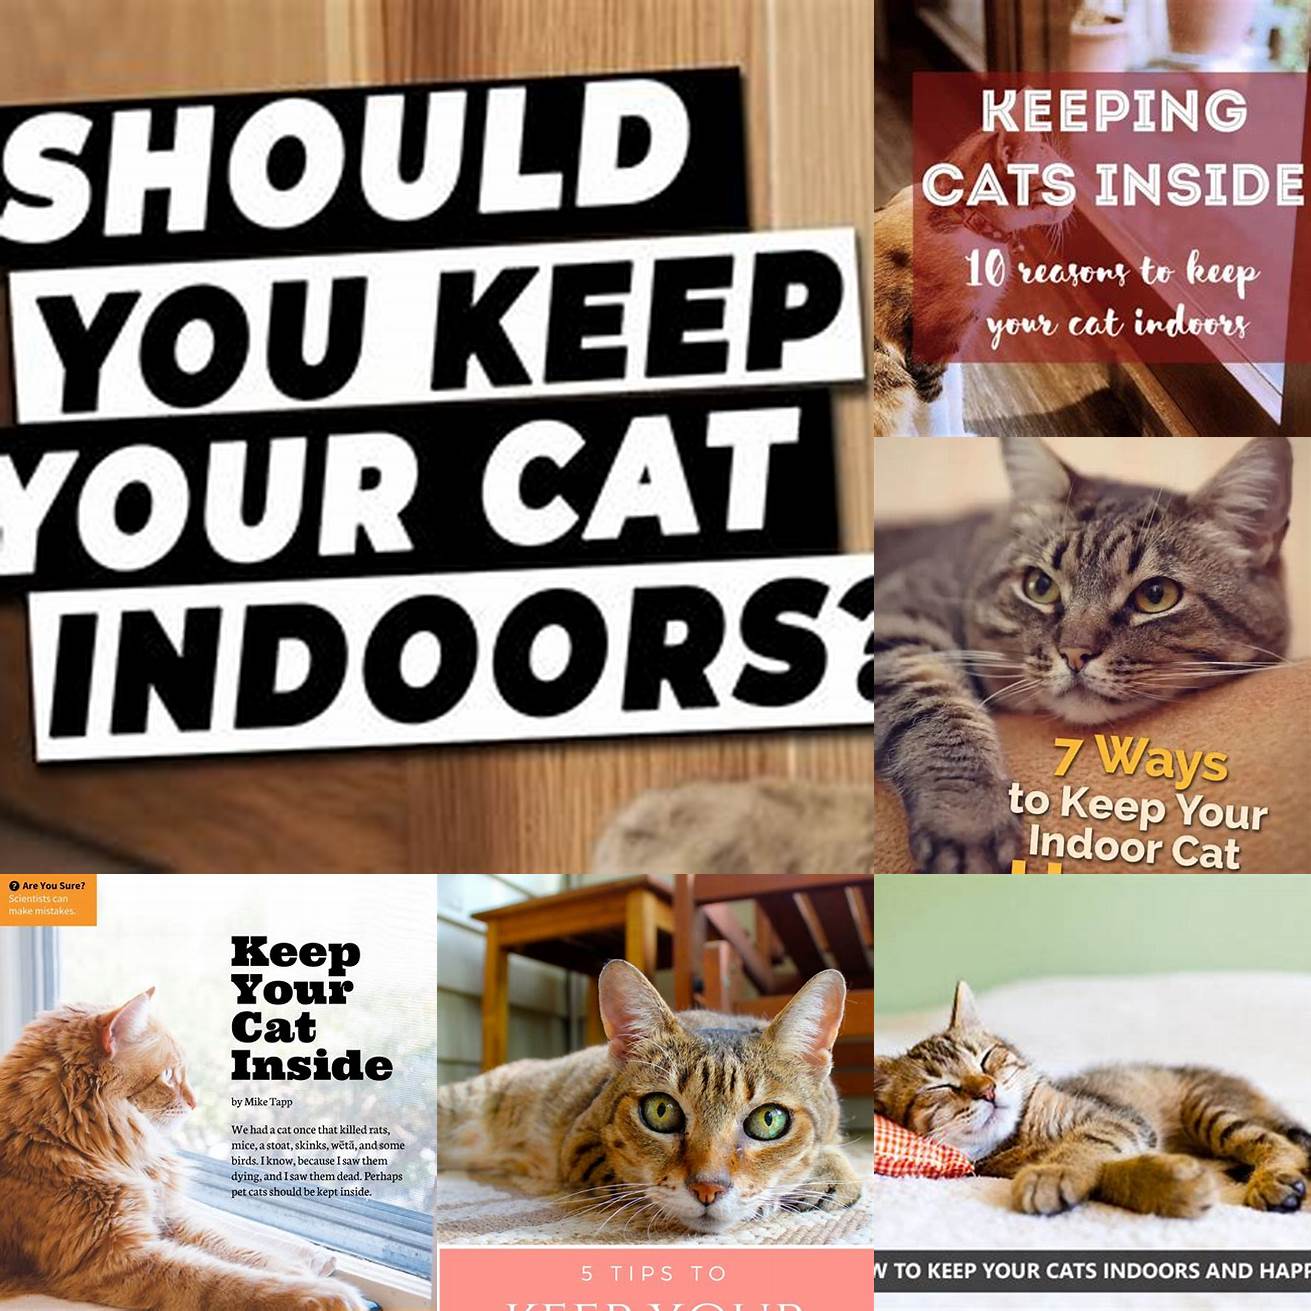 Keep your cats indoors